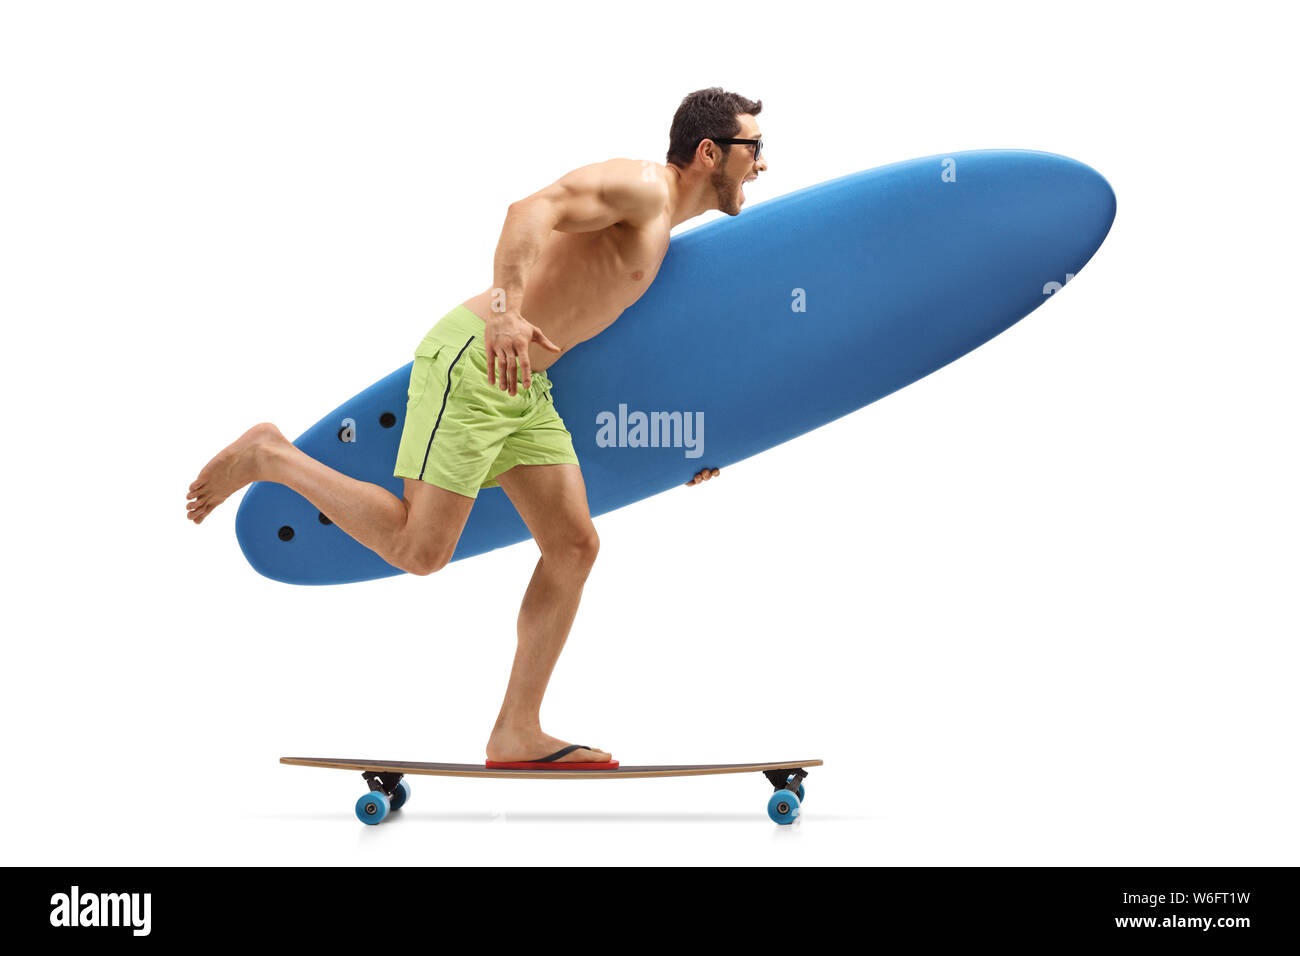 Young man with a surboard riding a longboard Stock Photo